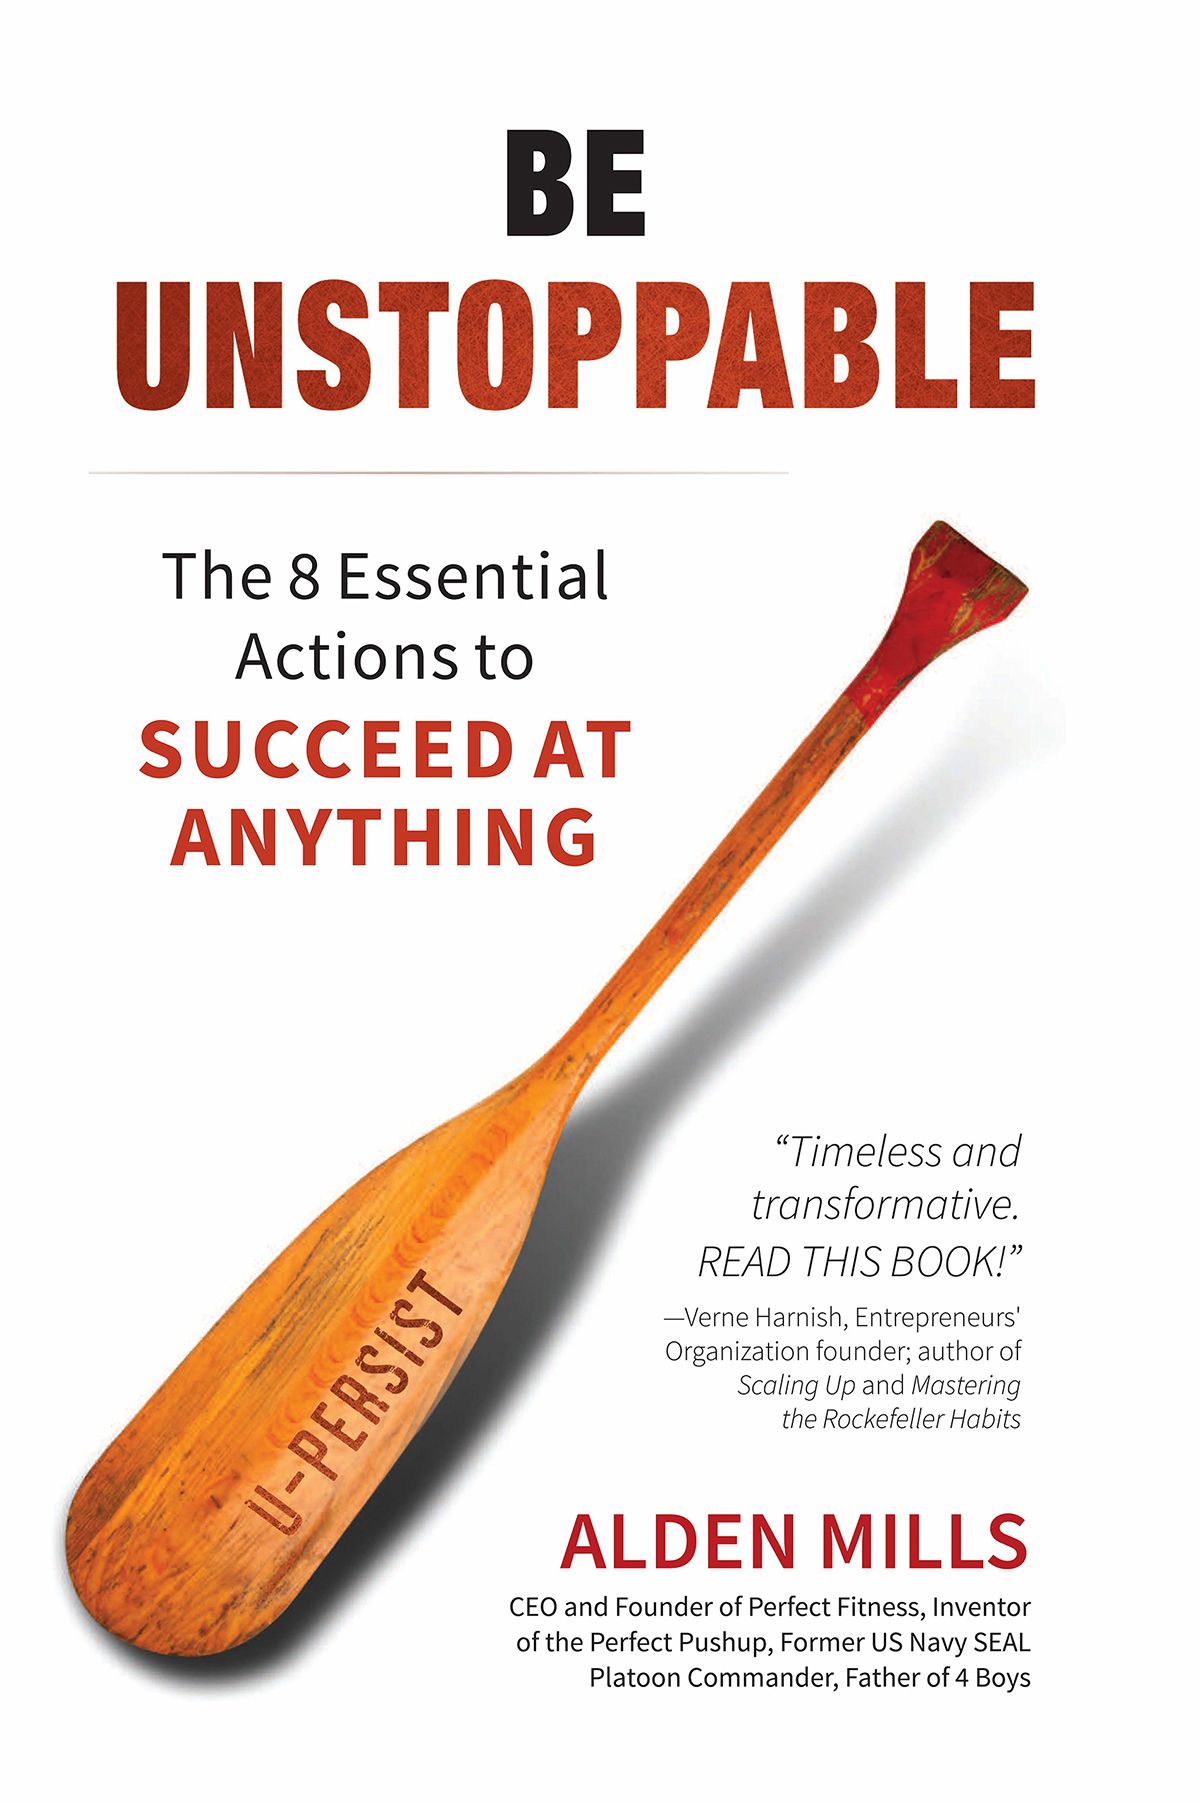 BE UNSTOPPABLE The 8 Essential Actions to Succeed at Anything by Alden Mills - photo 1